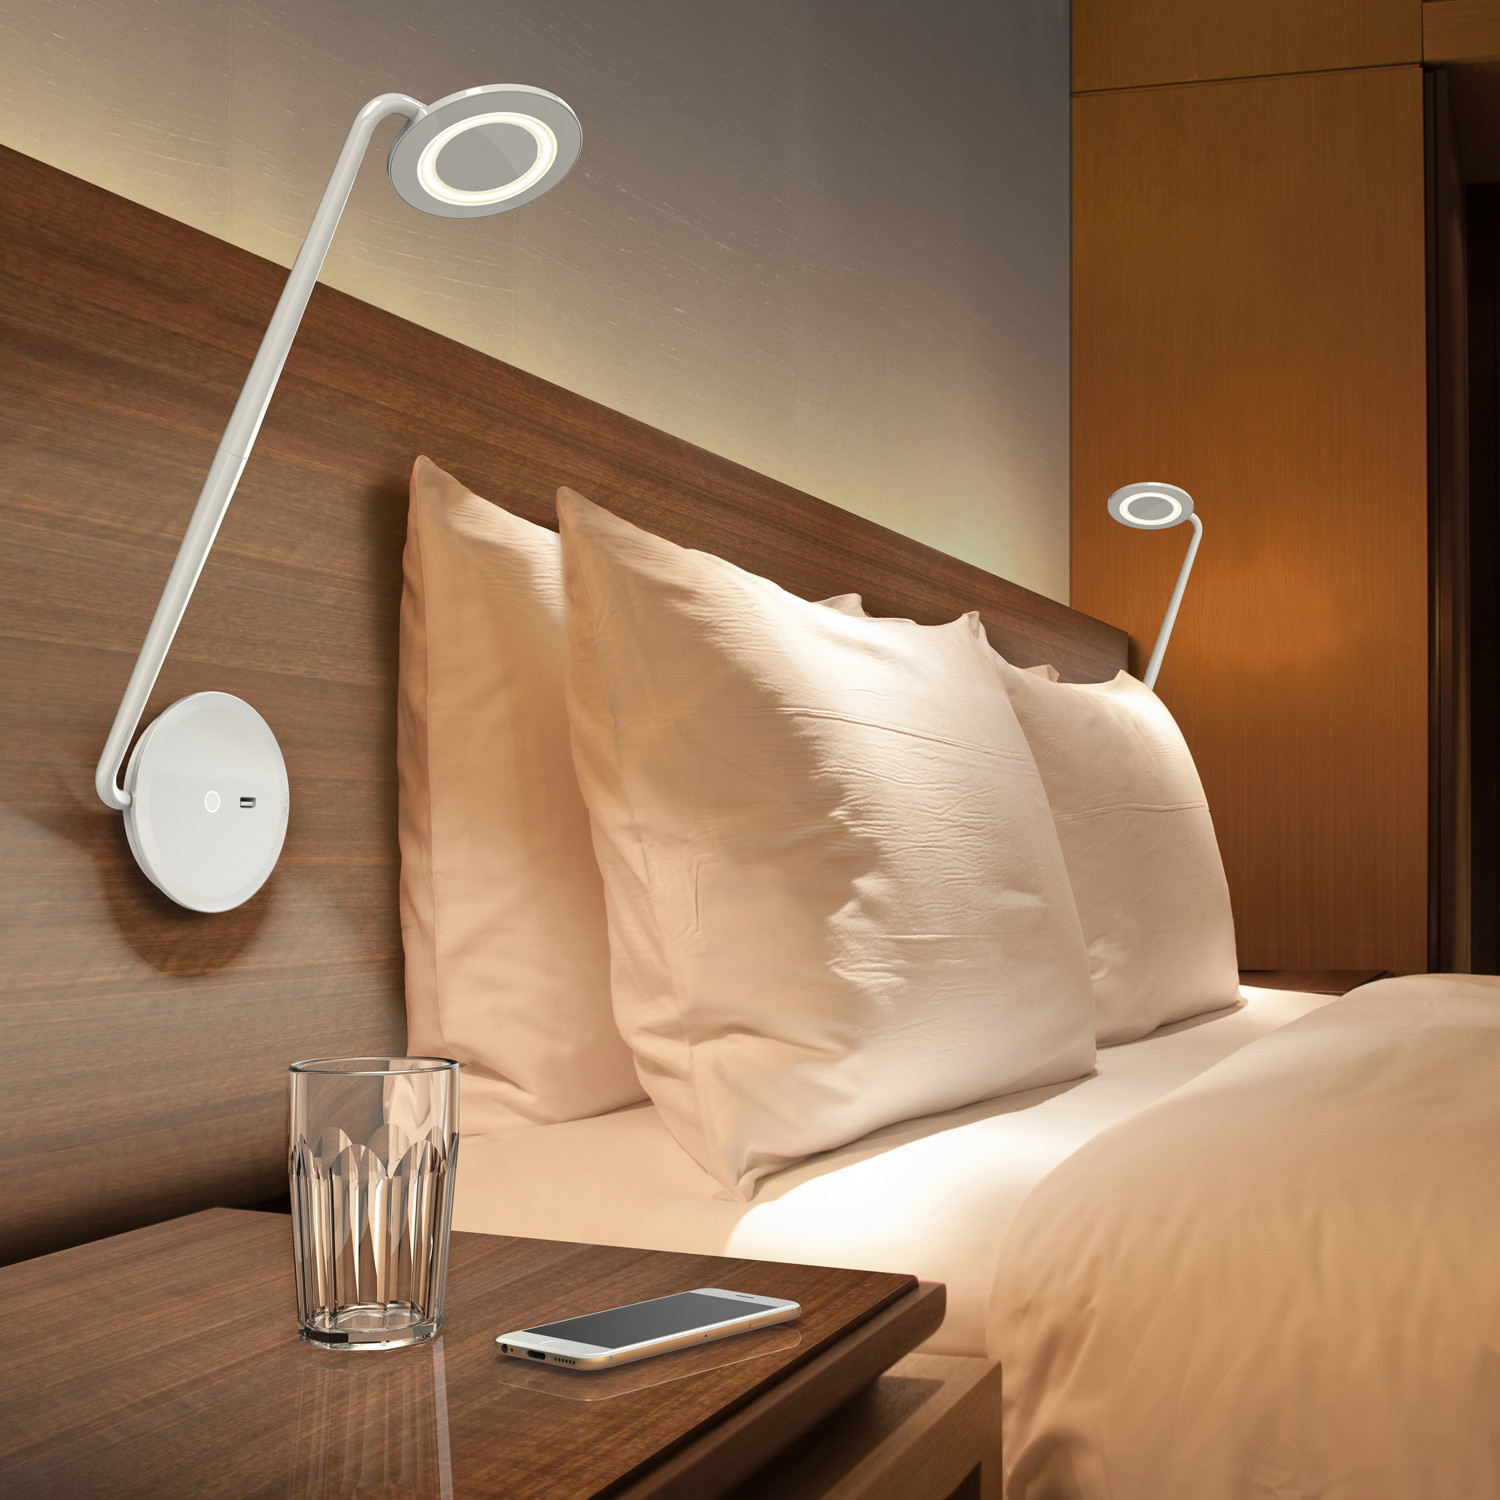 Wall Mounted Bedroom Lighting
 How to Choose Bedside Reading Lights